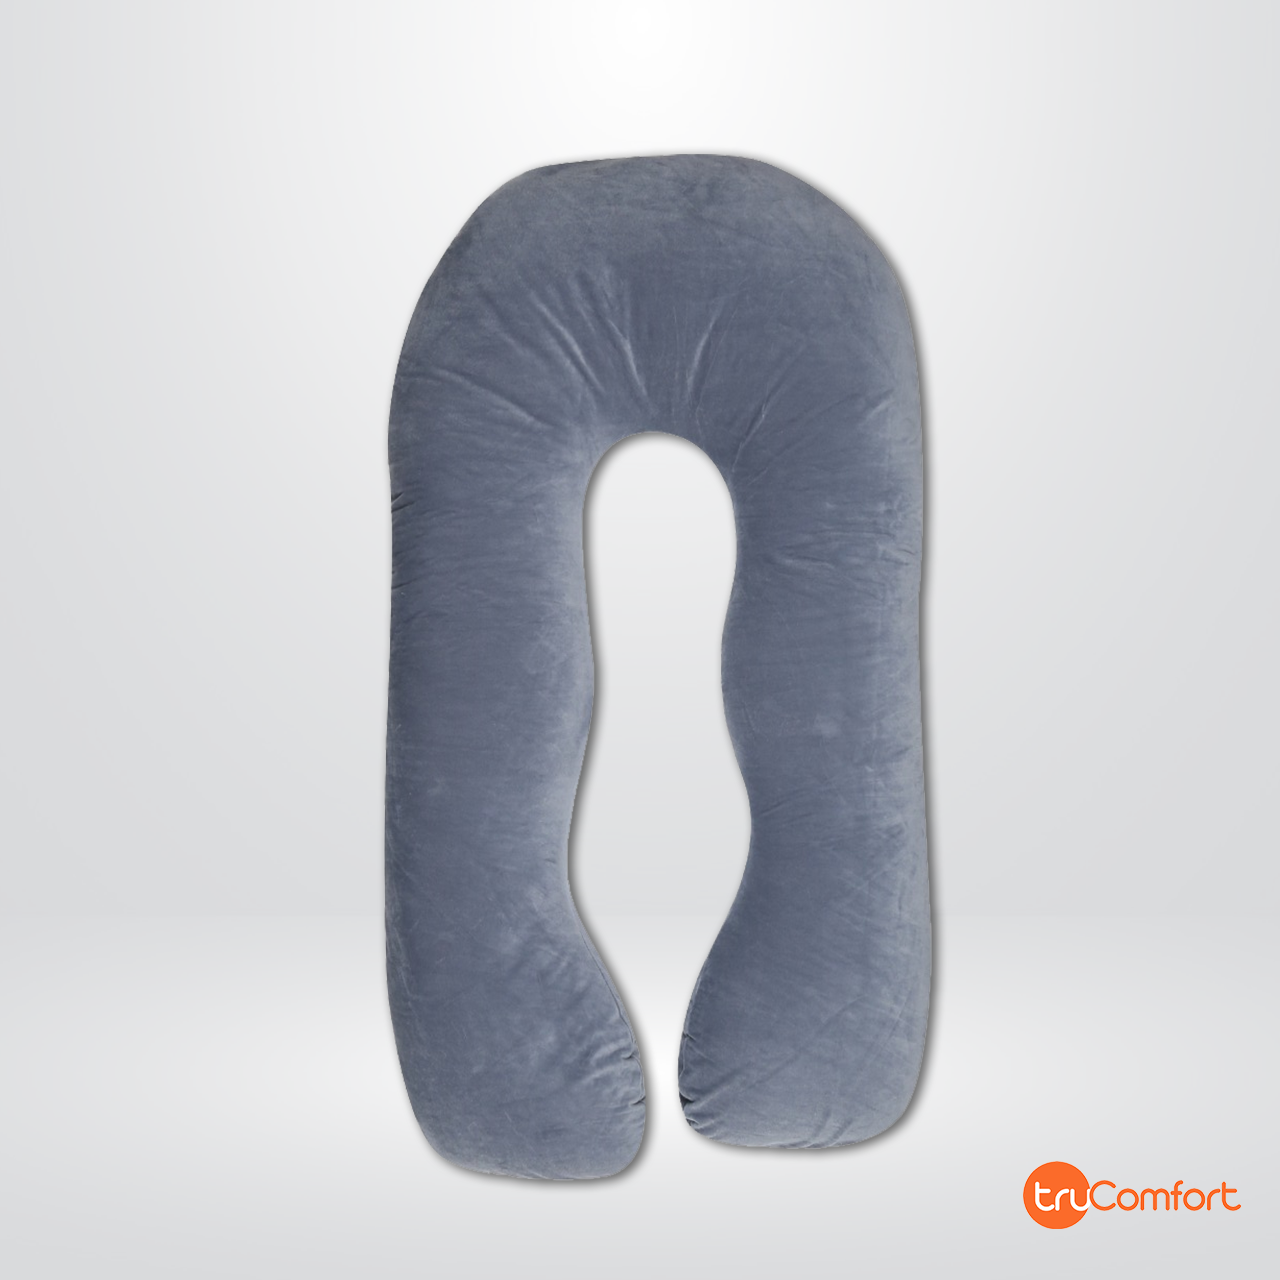 TruComfort U-Shaped Pregnancy Maternity Pillow With Velvet Cover -54 I –